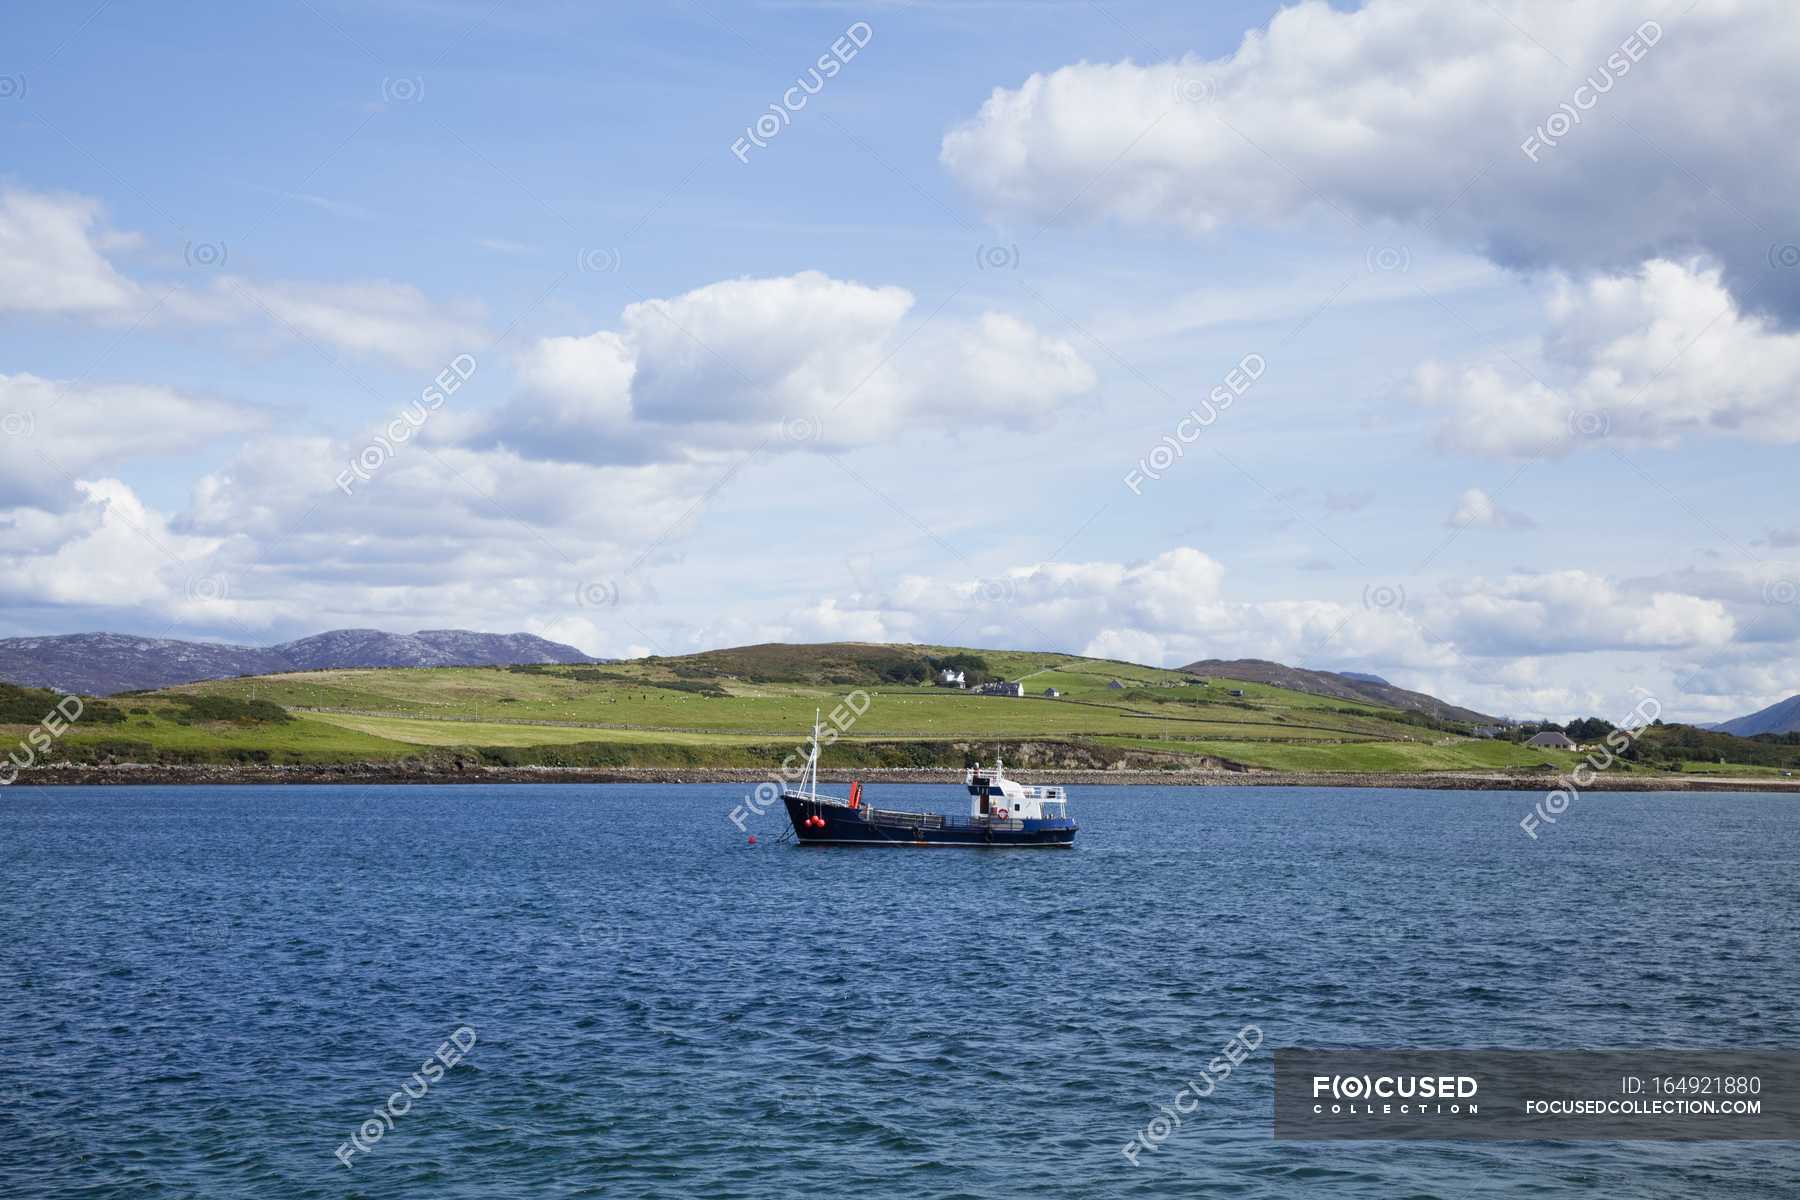 Boat in water against coast — Stock Photo | #164921880